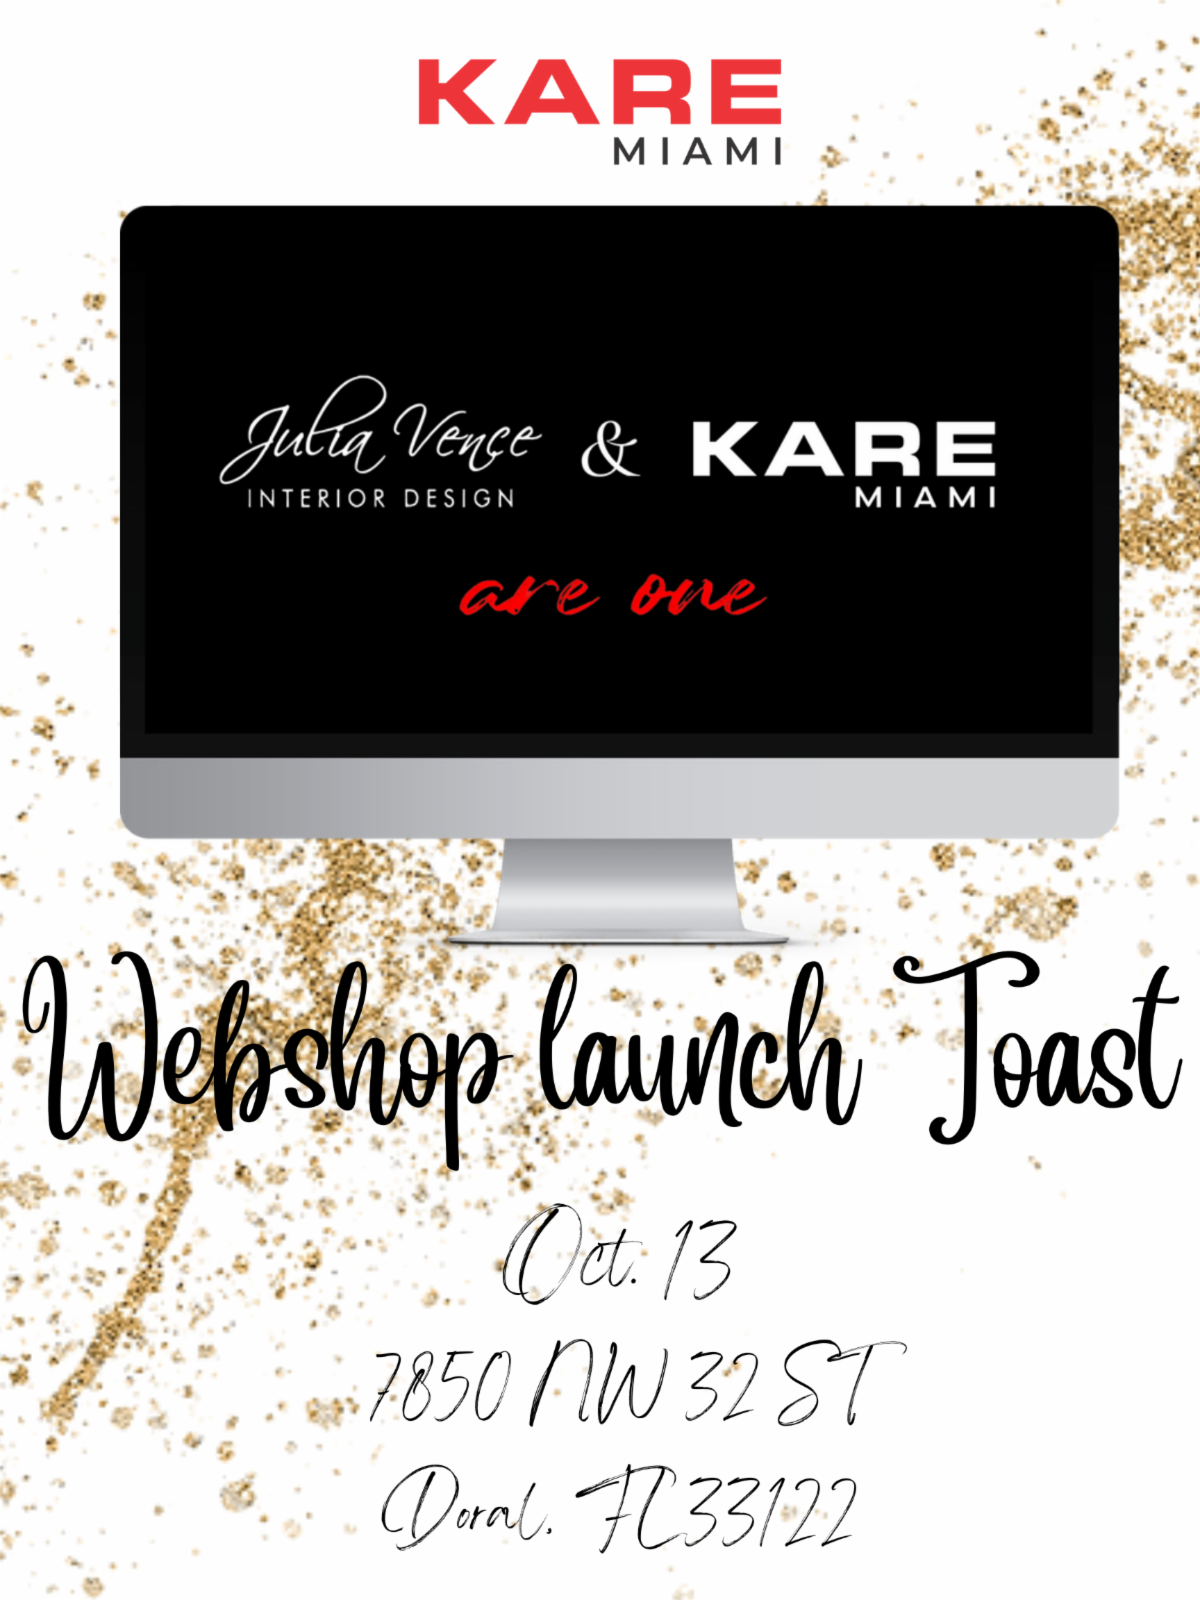 KARE Miami Invites You to Our Webshop Launch image